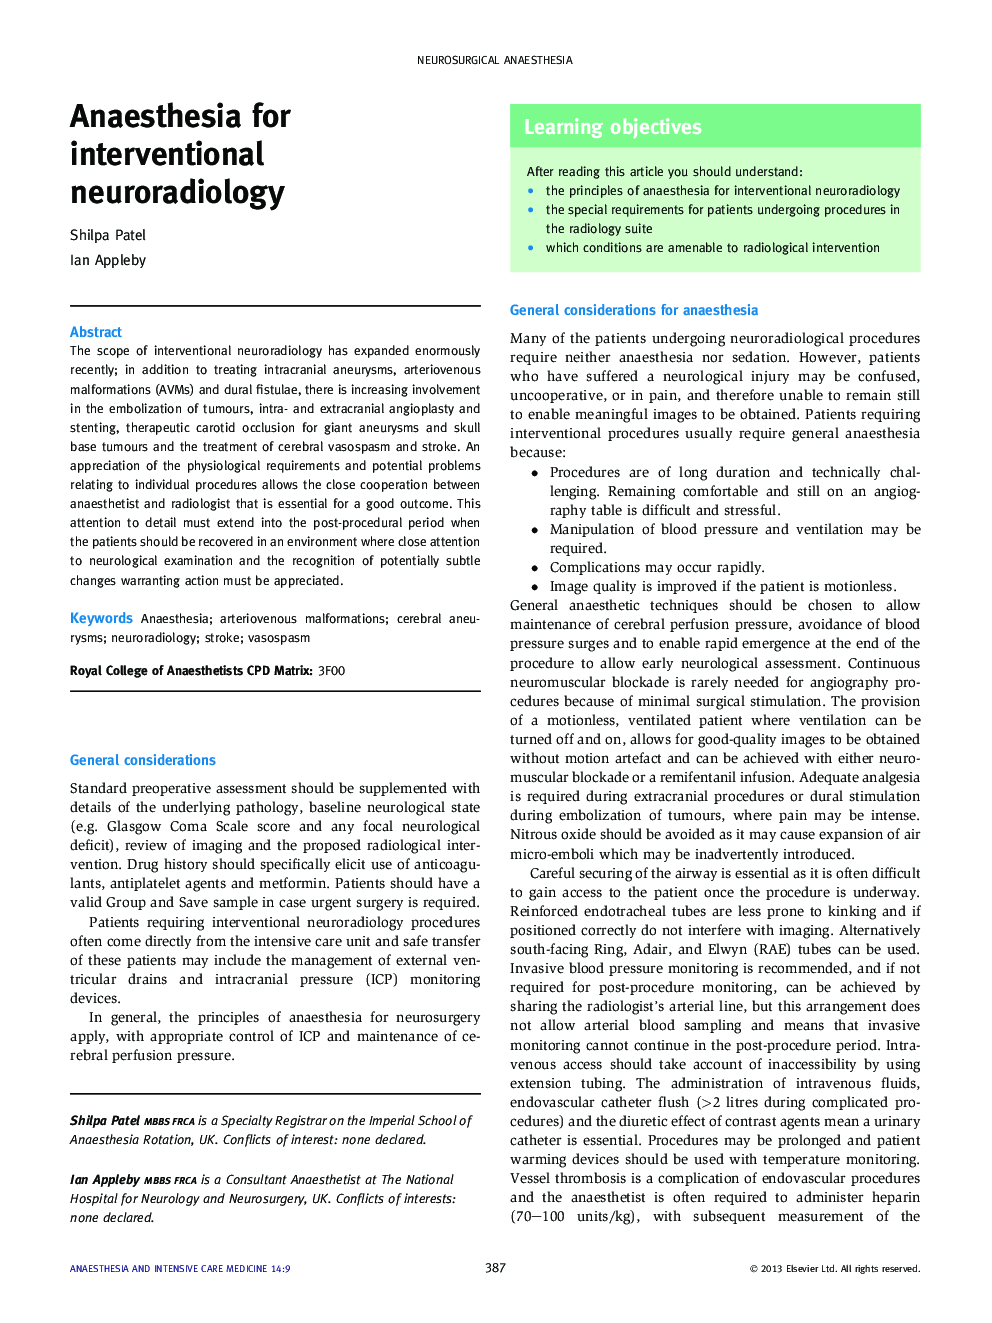 Anaesthesia for interventional neuroradiology